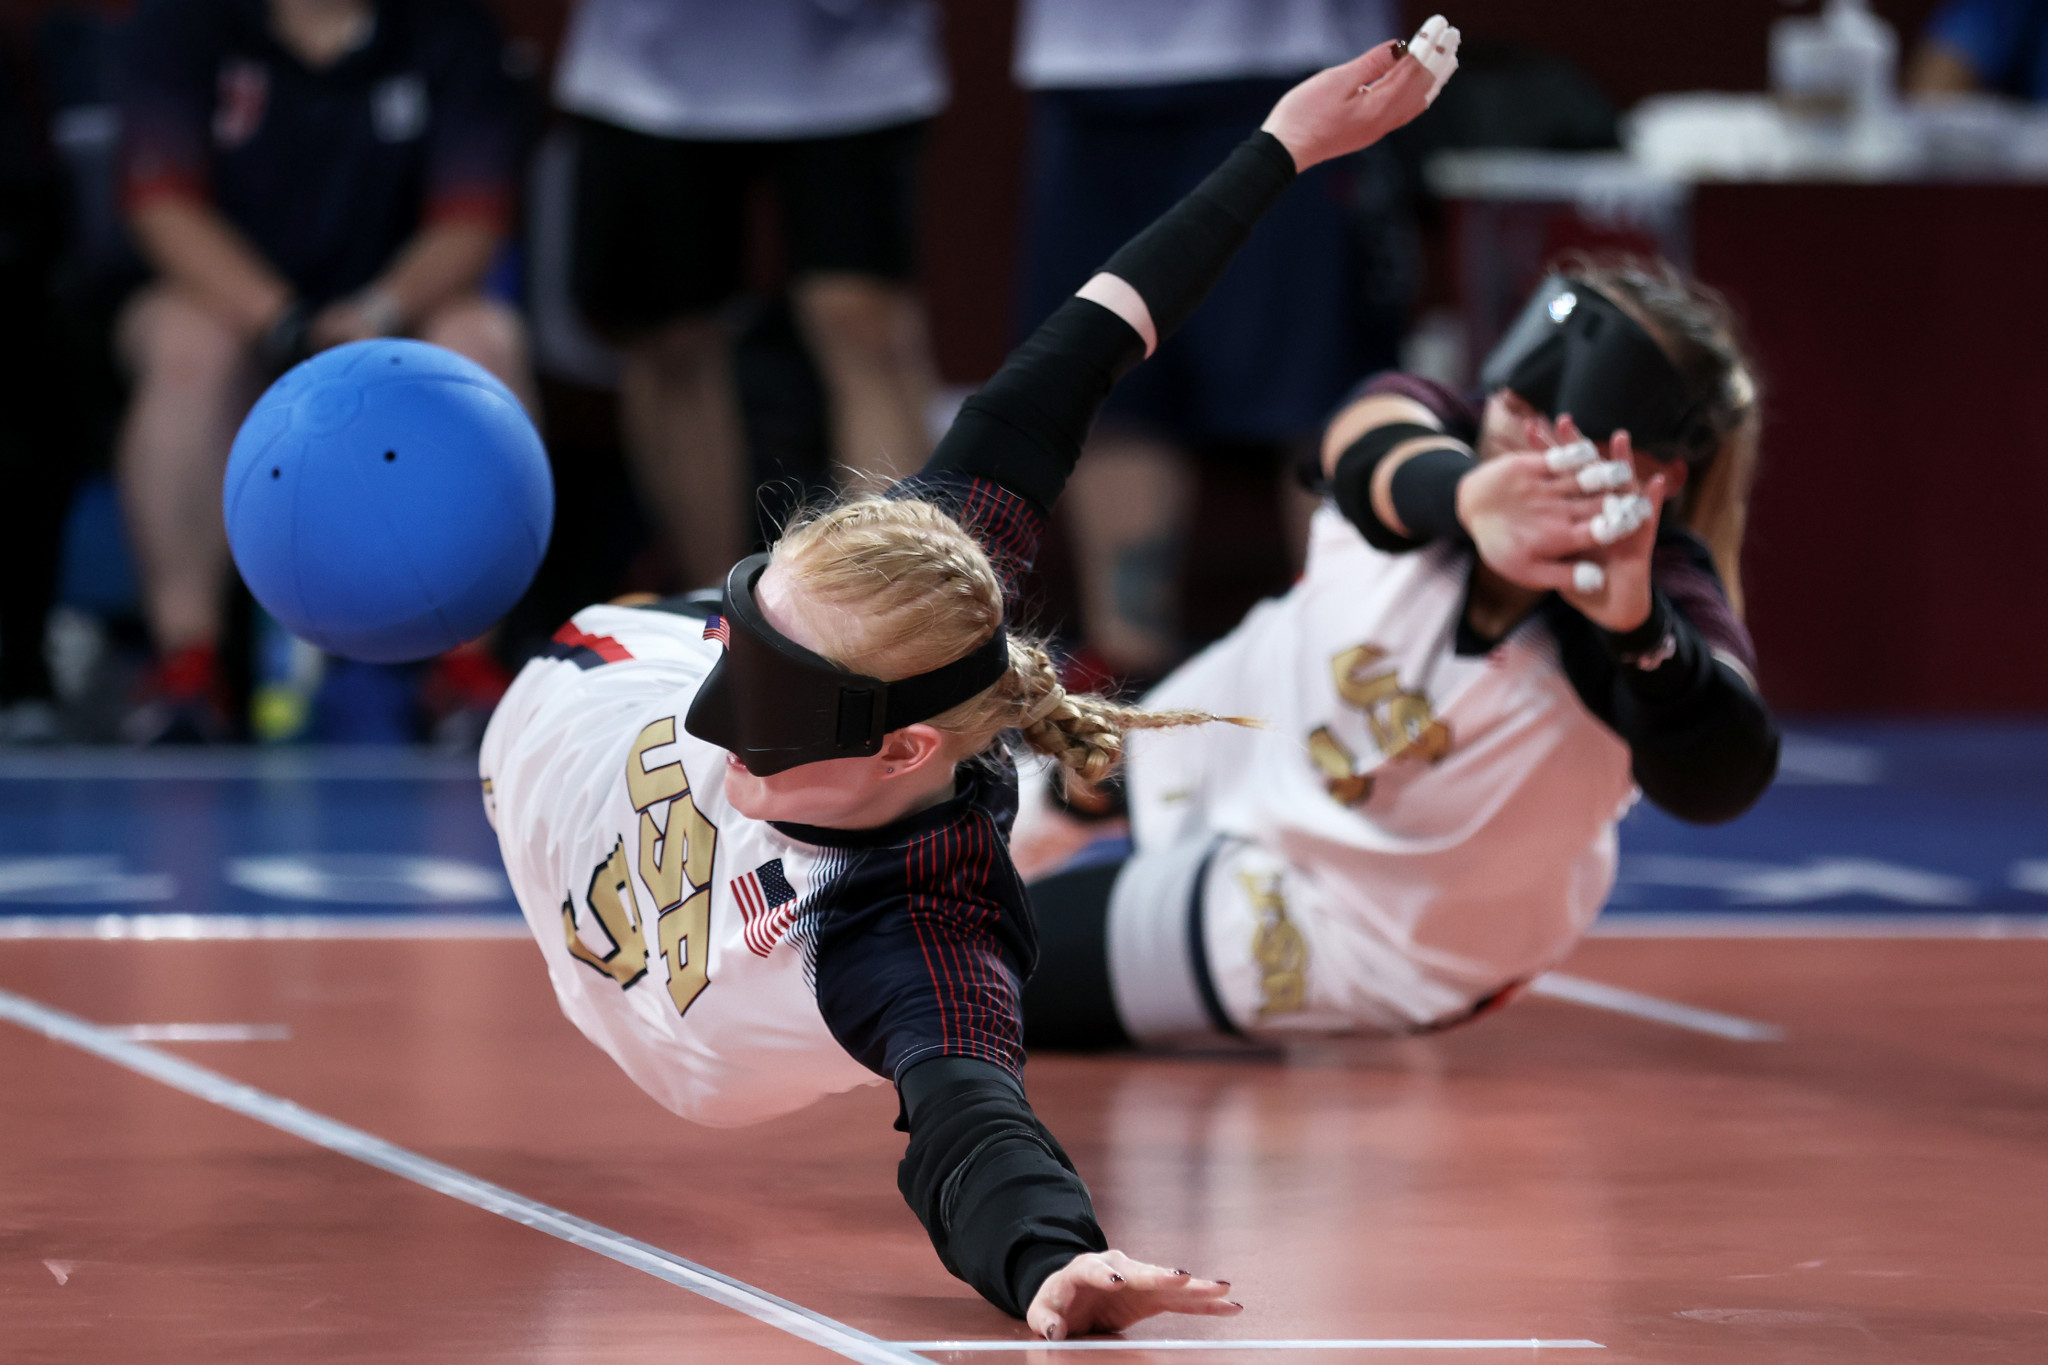 Portugal has been selected to host this year's Goalball World Championships ©Getty Images